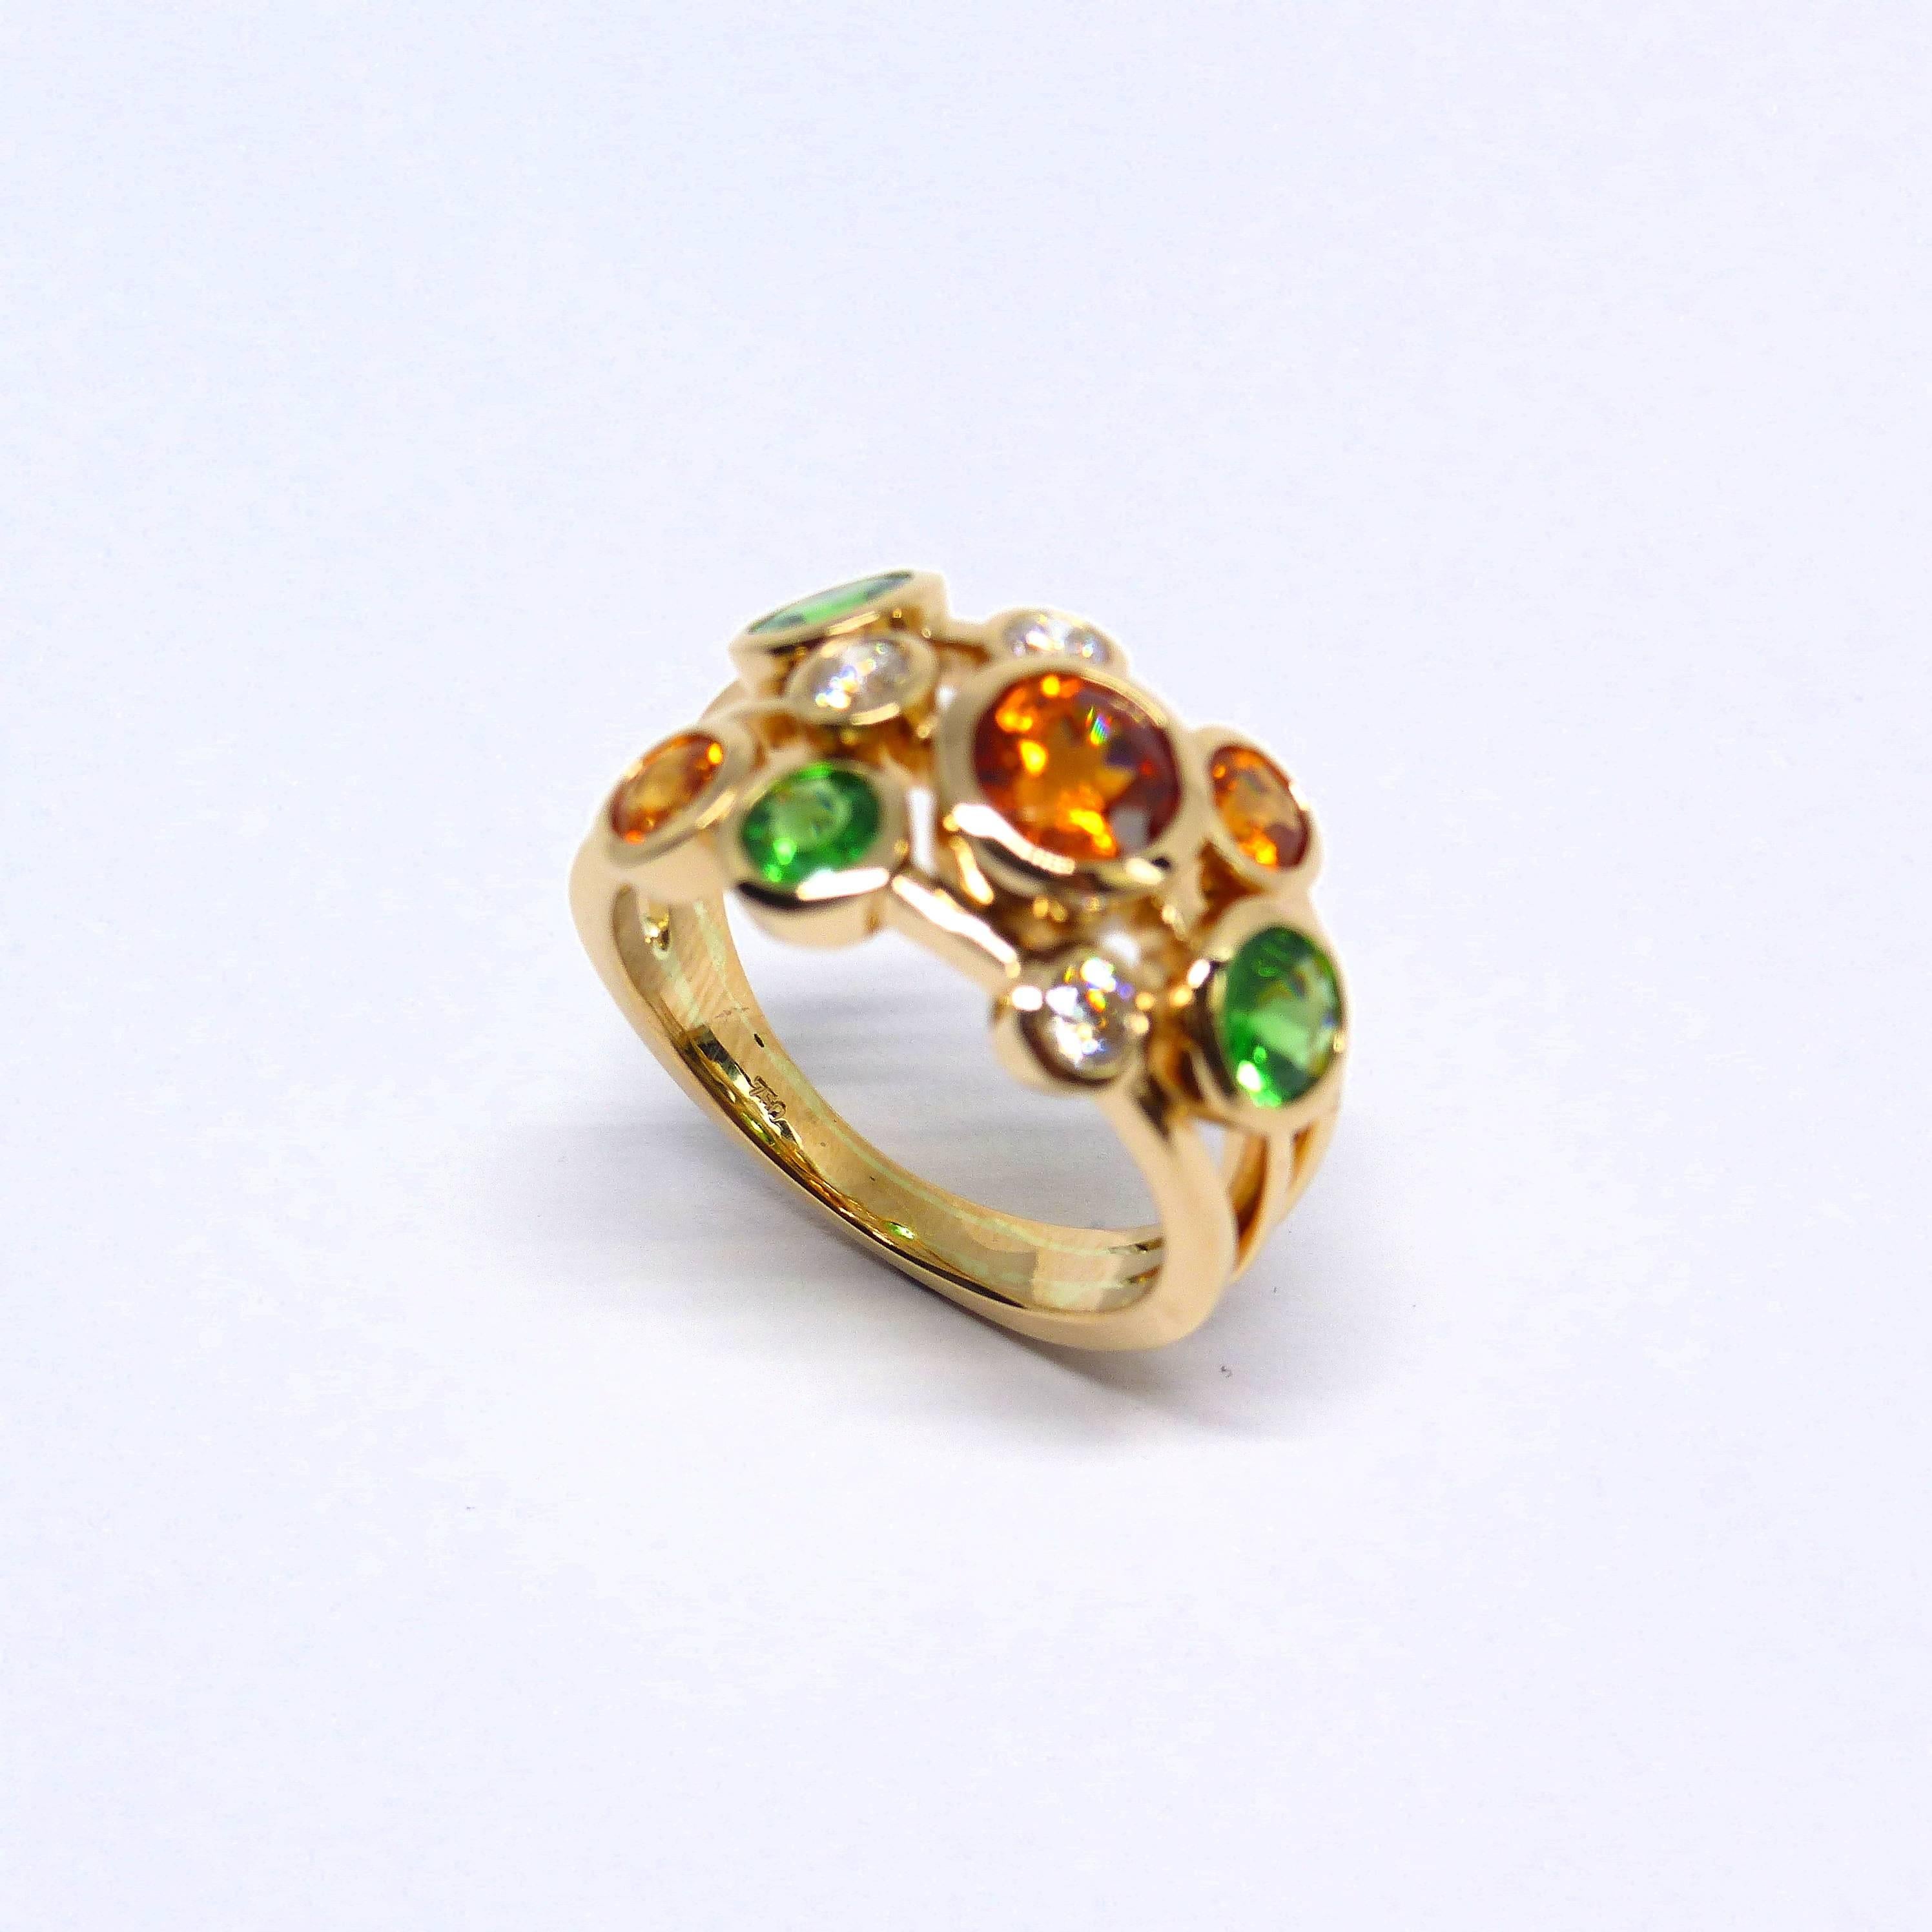 Thomas Leyser is renowned for his contemporary jewellery designs utilizing fine gemstones. 

This 18k rose gold ring 8,75gr. with 3 Mandarine Garnet round 4-6mm, 1,47cts. + 3 Tsavolites round 4-5mm, 1,21cts. + 3 diamonds brillant cut 3mm, 0,31cts.